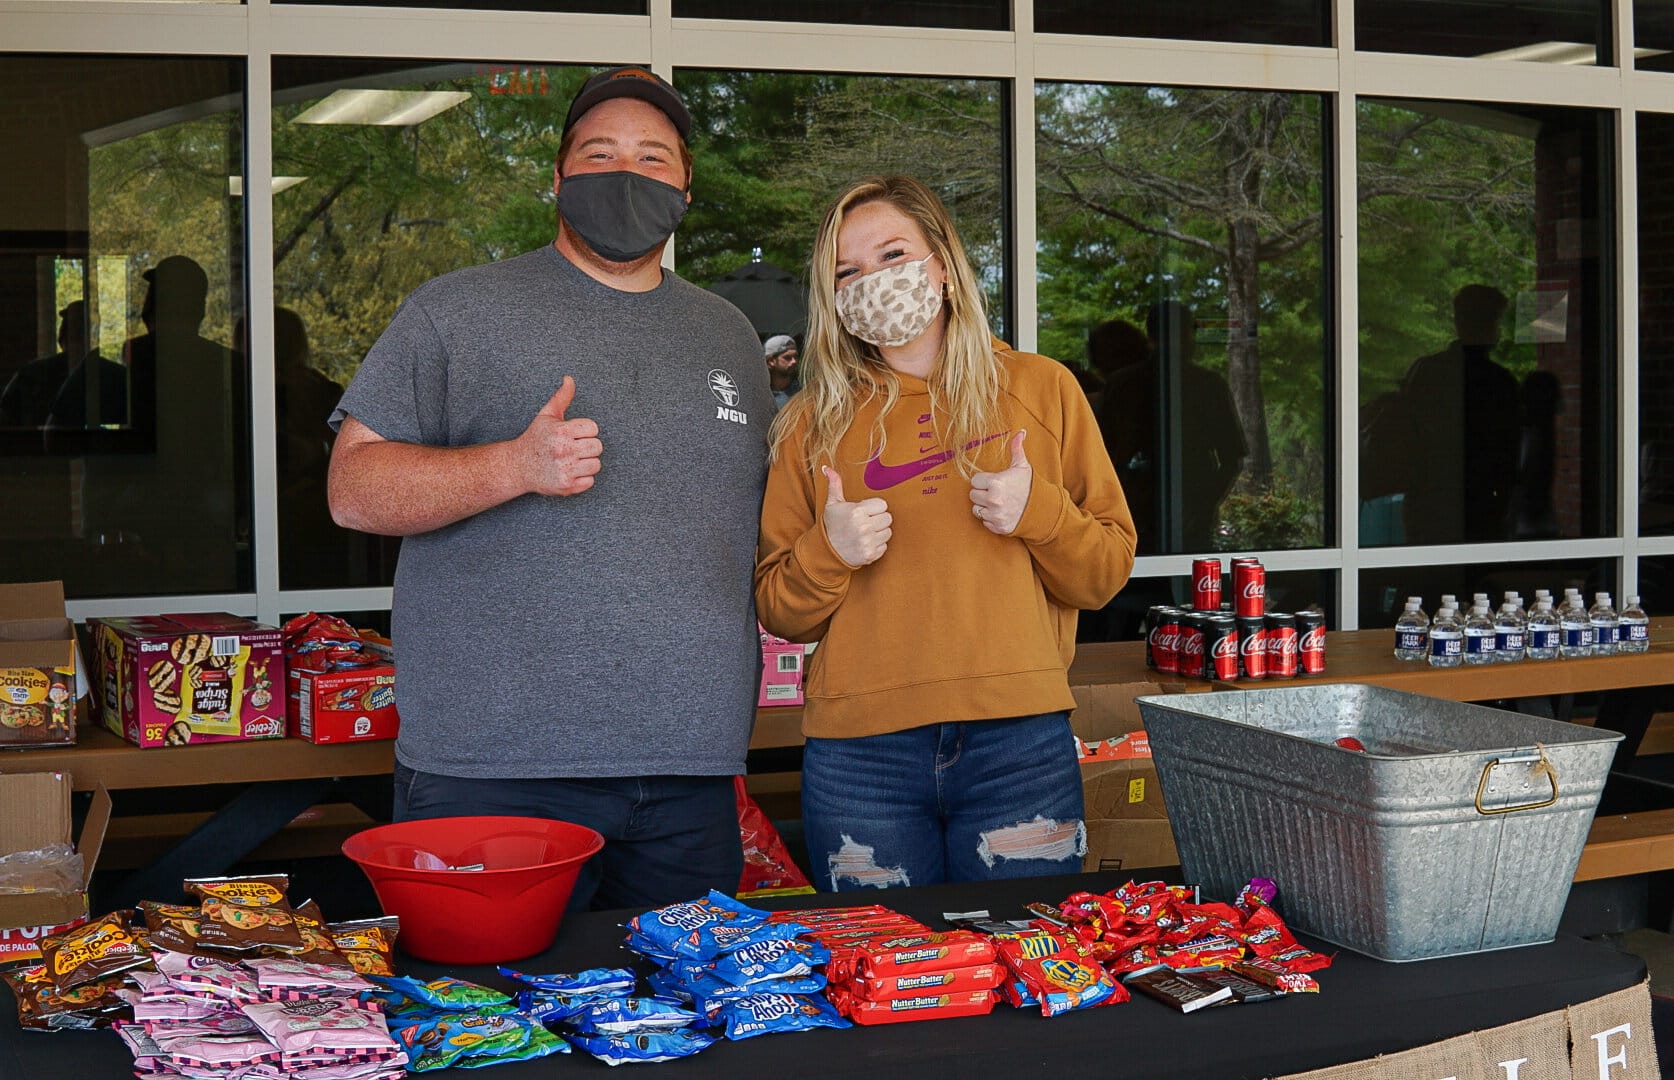 Graduate assistant Blake Patron and junior Logan Jolley are ready to give out snacks and treats.